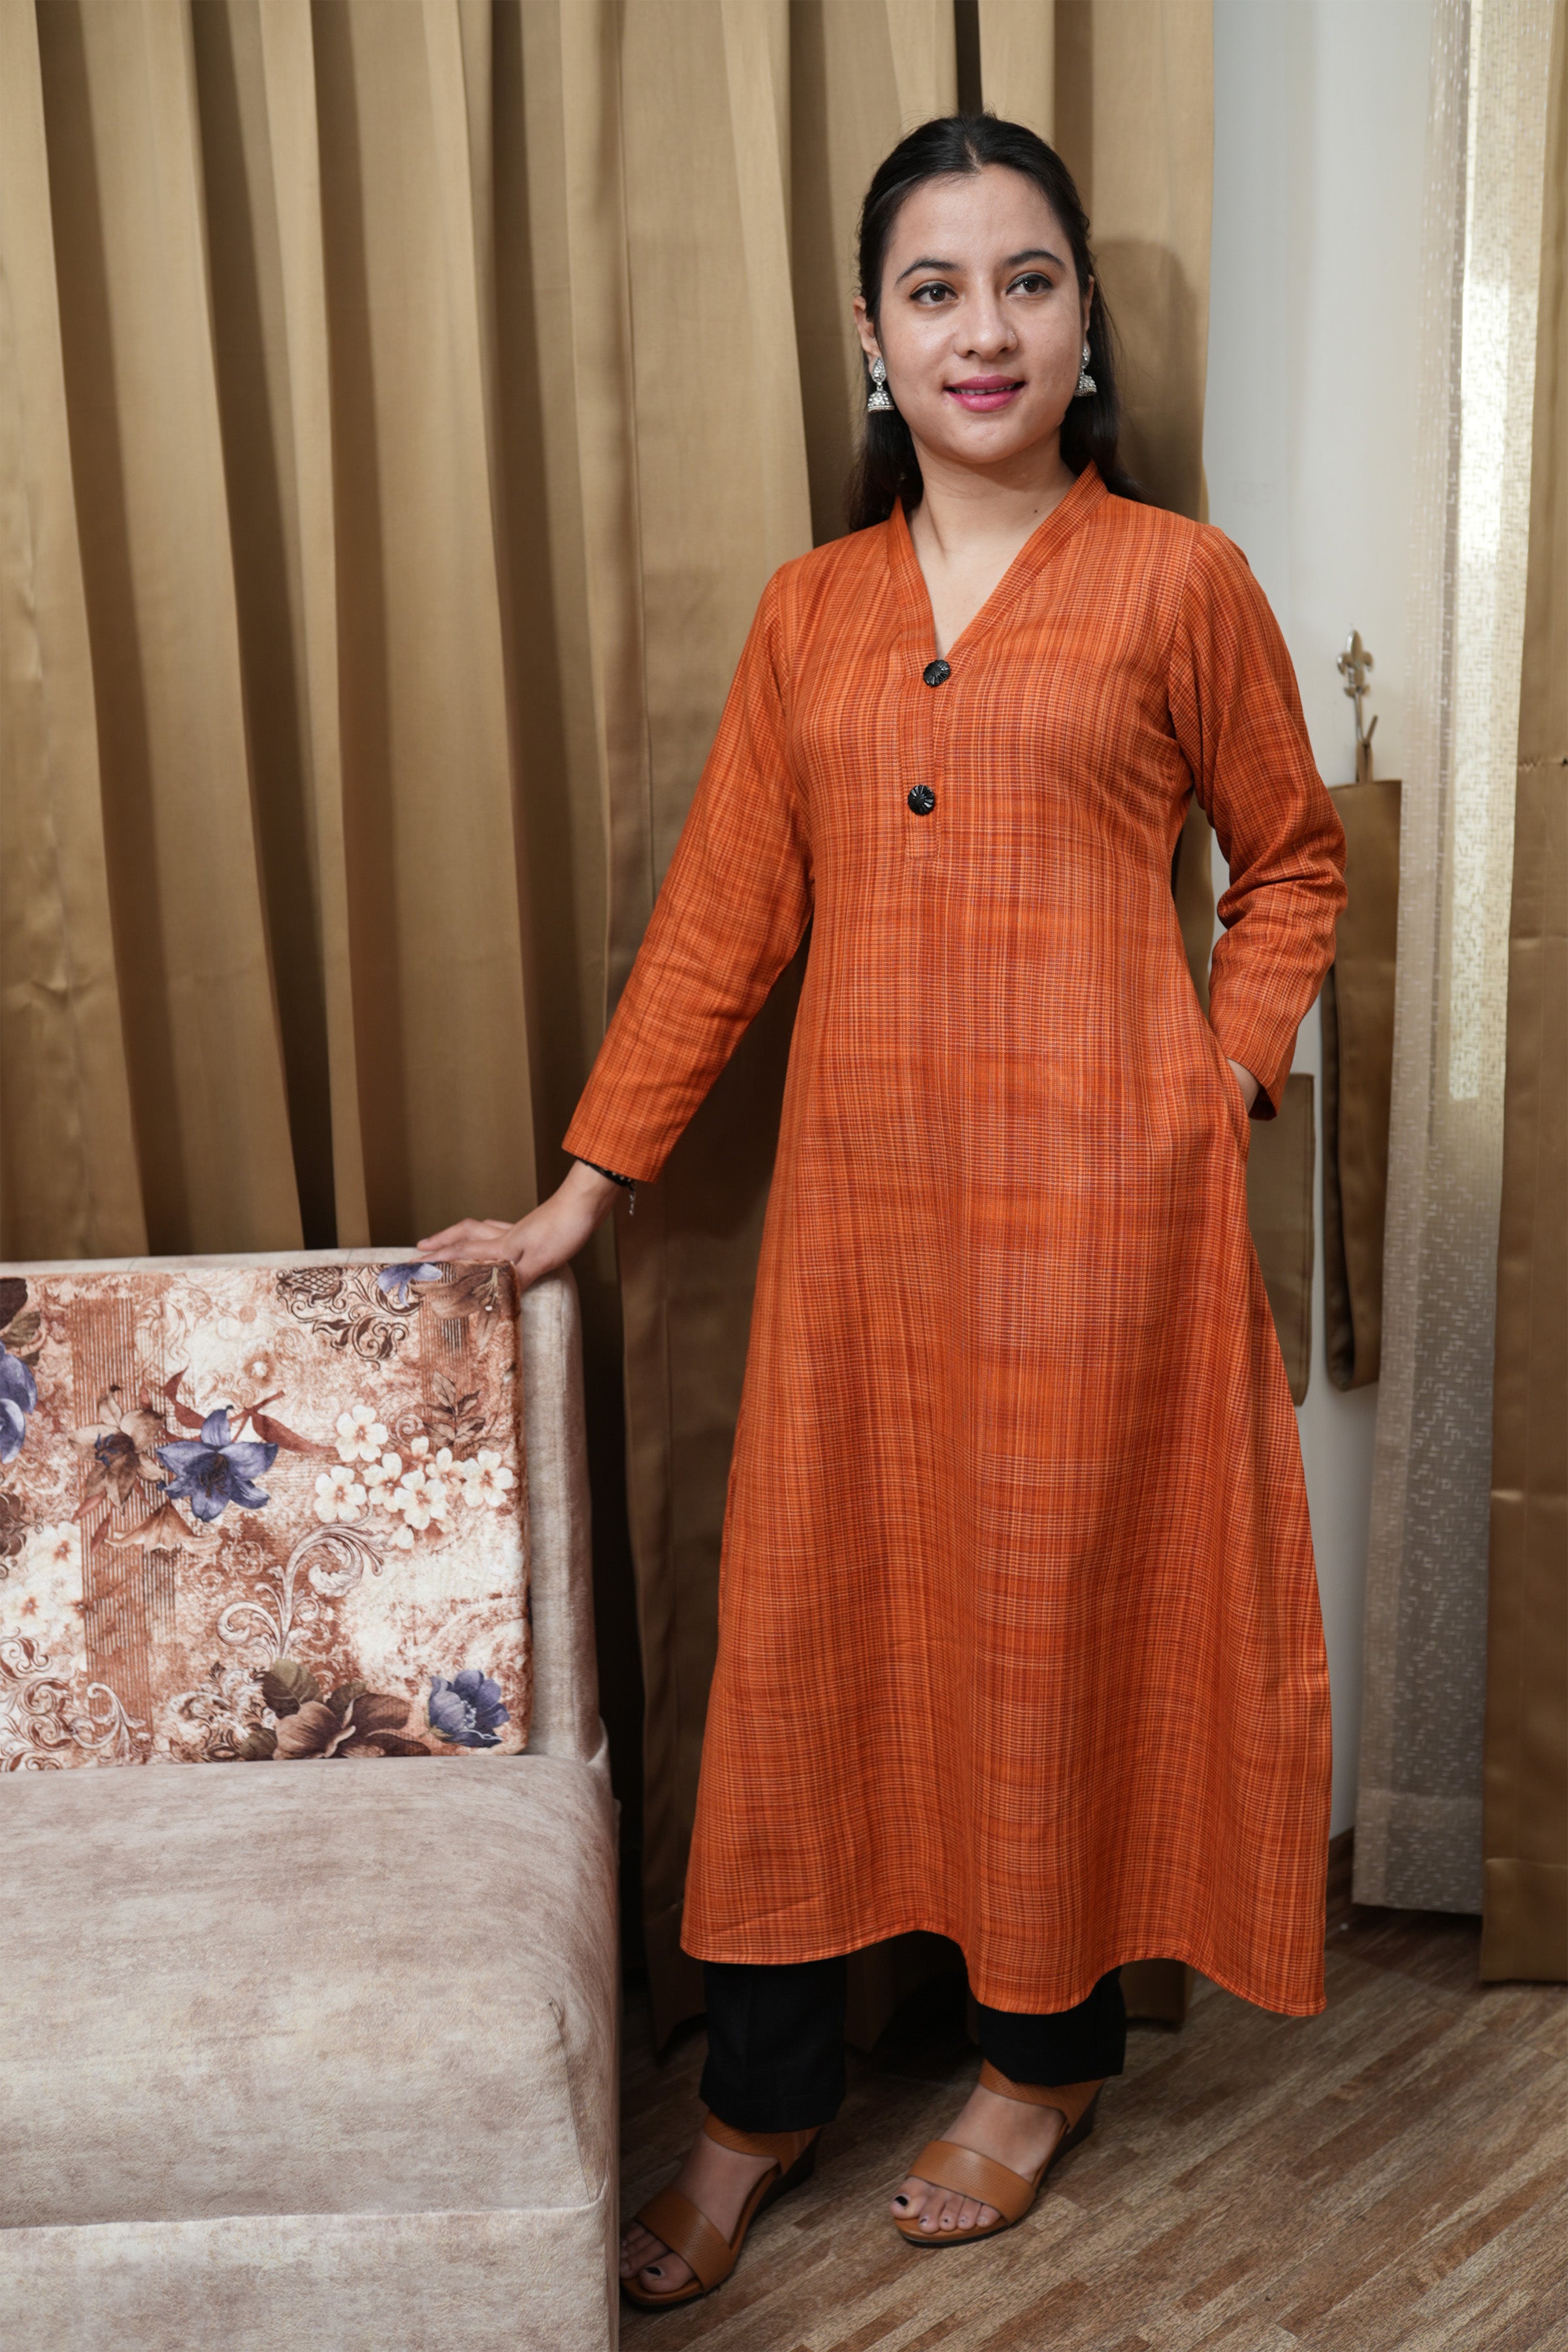 𝐁&𝐁 𝐖𝐨𝐫𝐤𝐬 𝐒𝐚𝐥𝐞 - SPORTKING WOOLEN KURTI'S NOW AVAILABLE @... |  Facebook